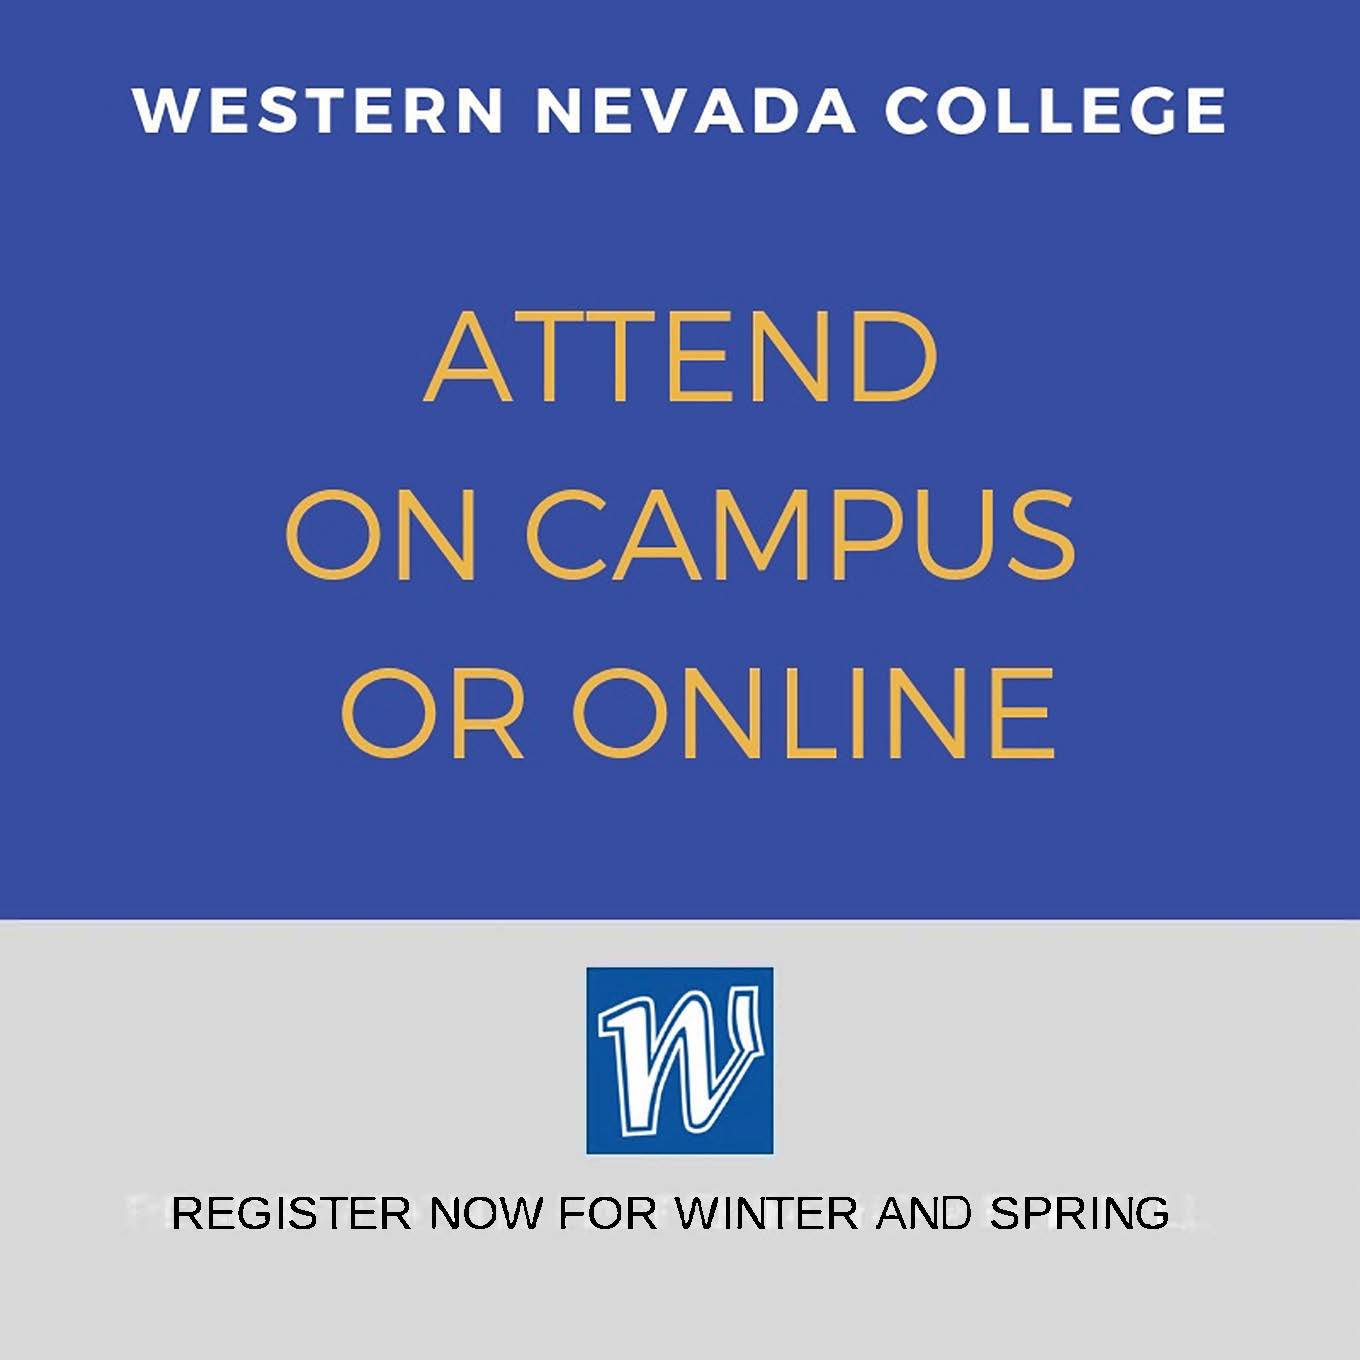 Students Have Many Options for Spring Semester